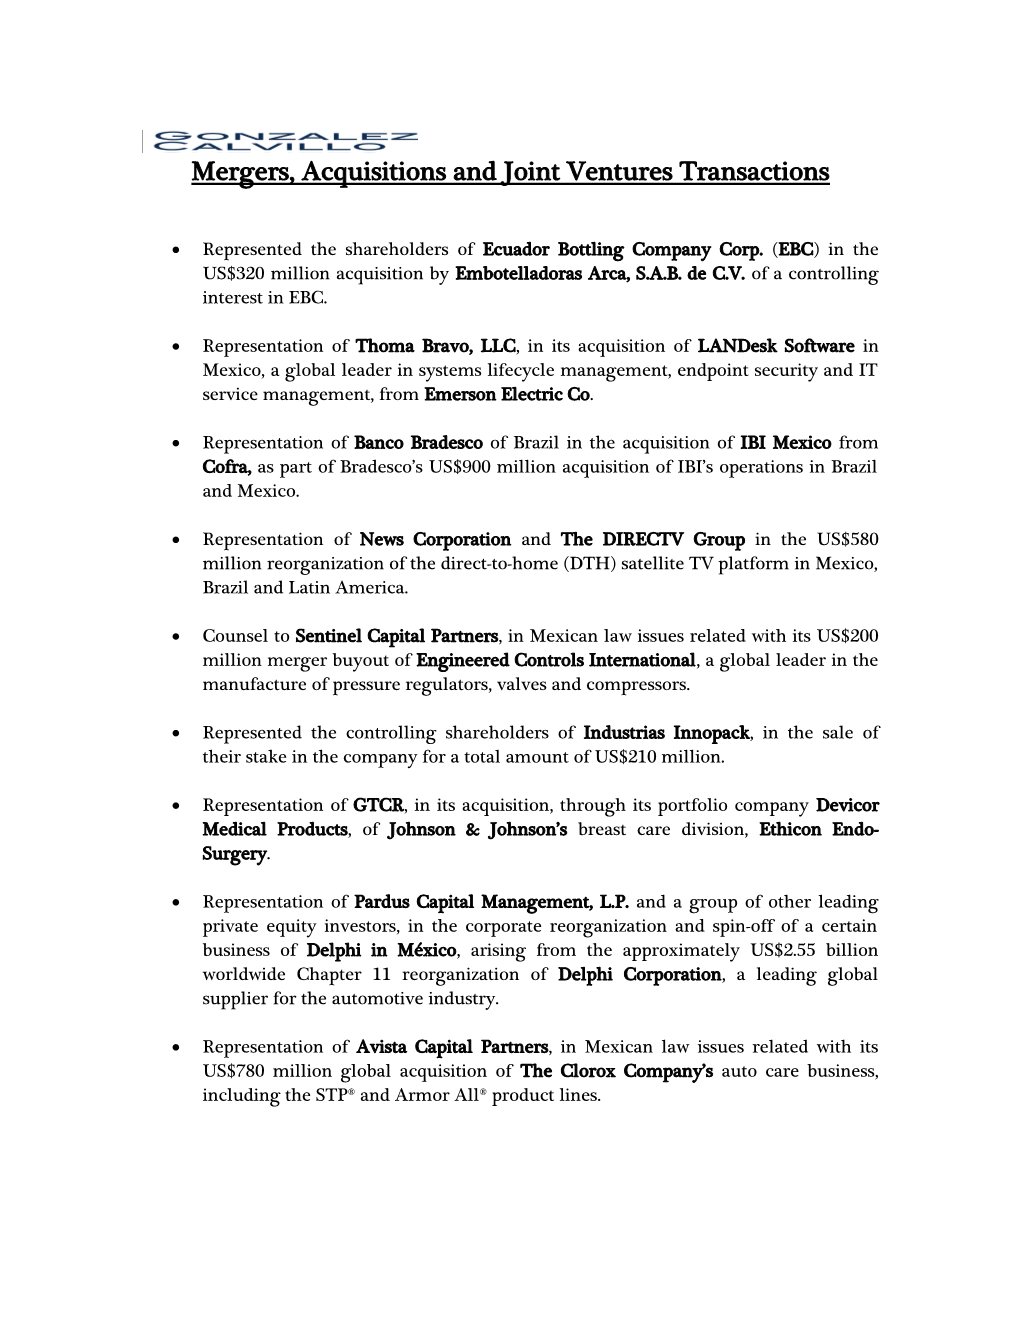 Mergers, Acquisitions and Joint Venturestransactions